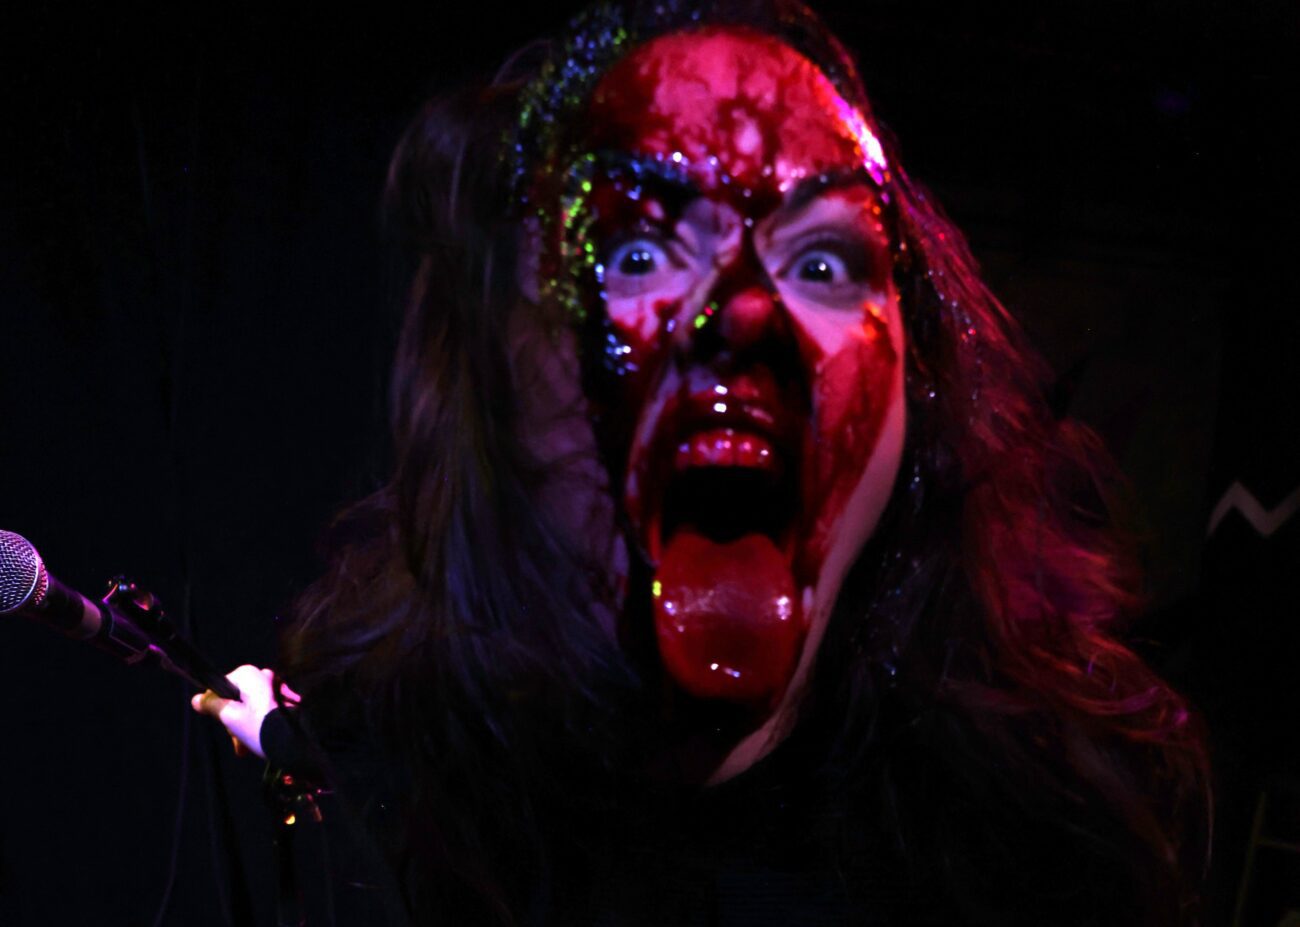 Maria stares down the audience, face covered in blood and her tongue sticking out